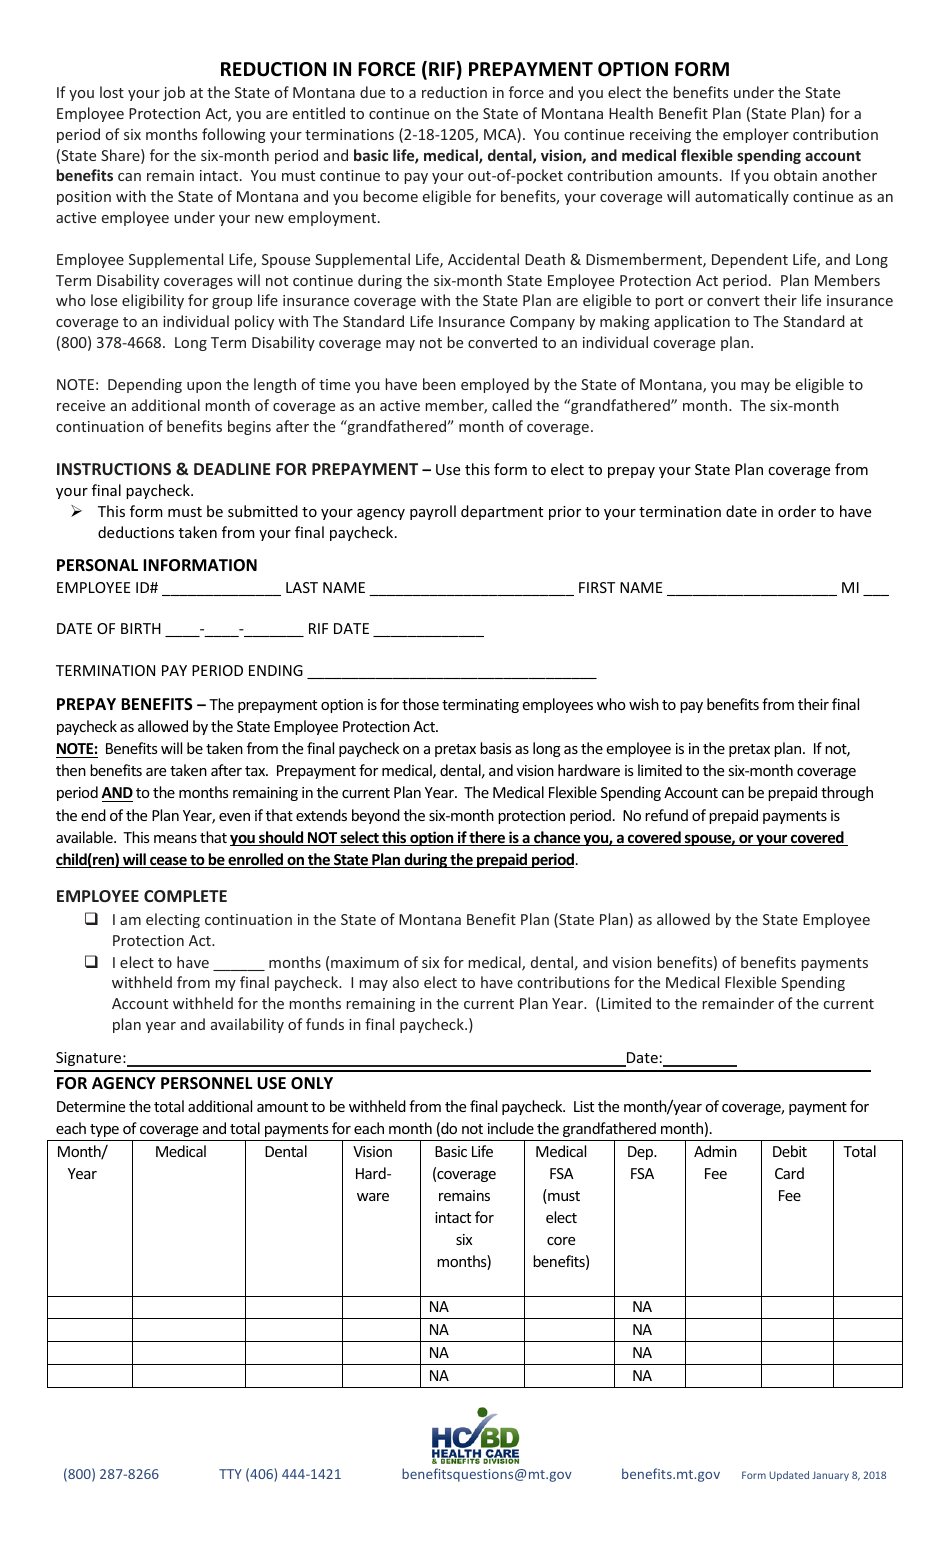 Reduction in Force (Rif) Prepayment Option Form - Montana, Page 1